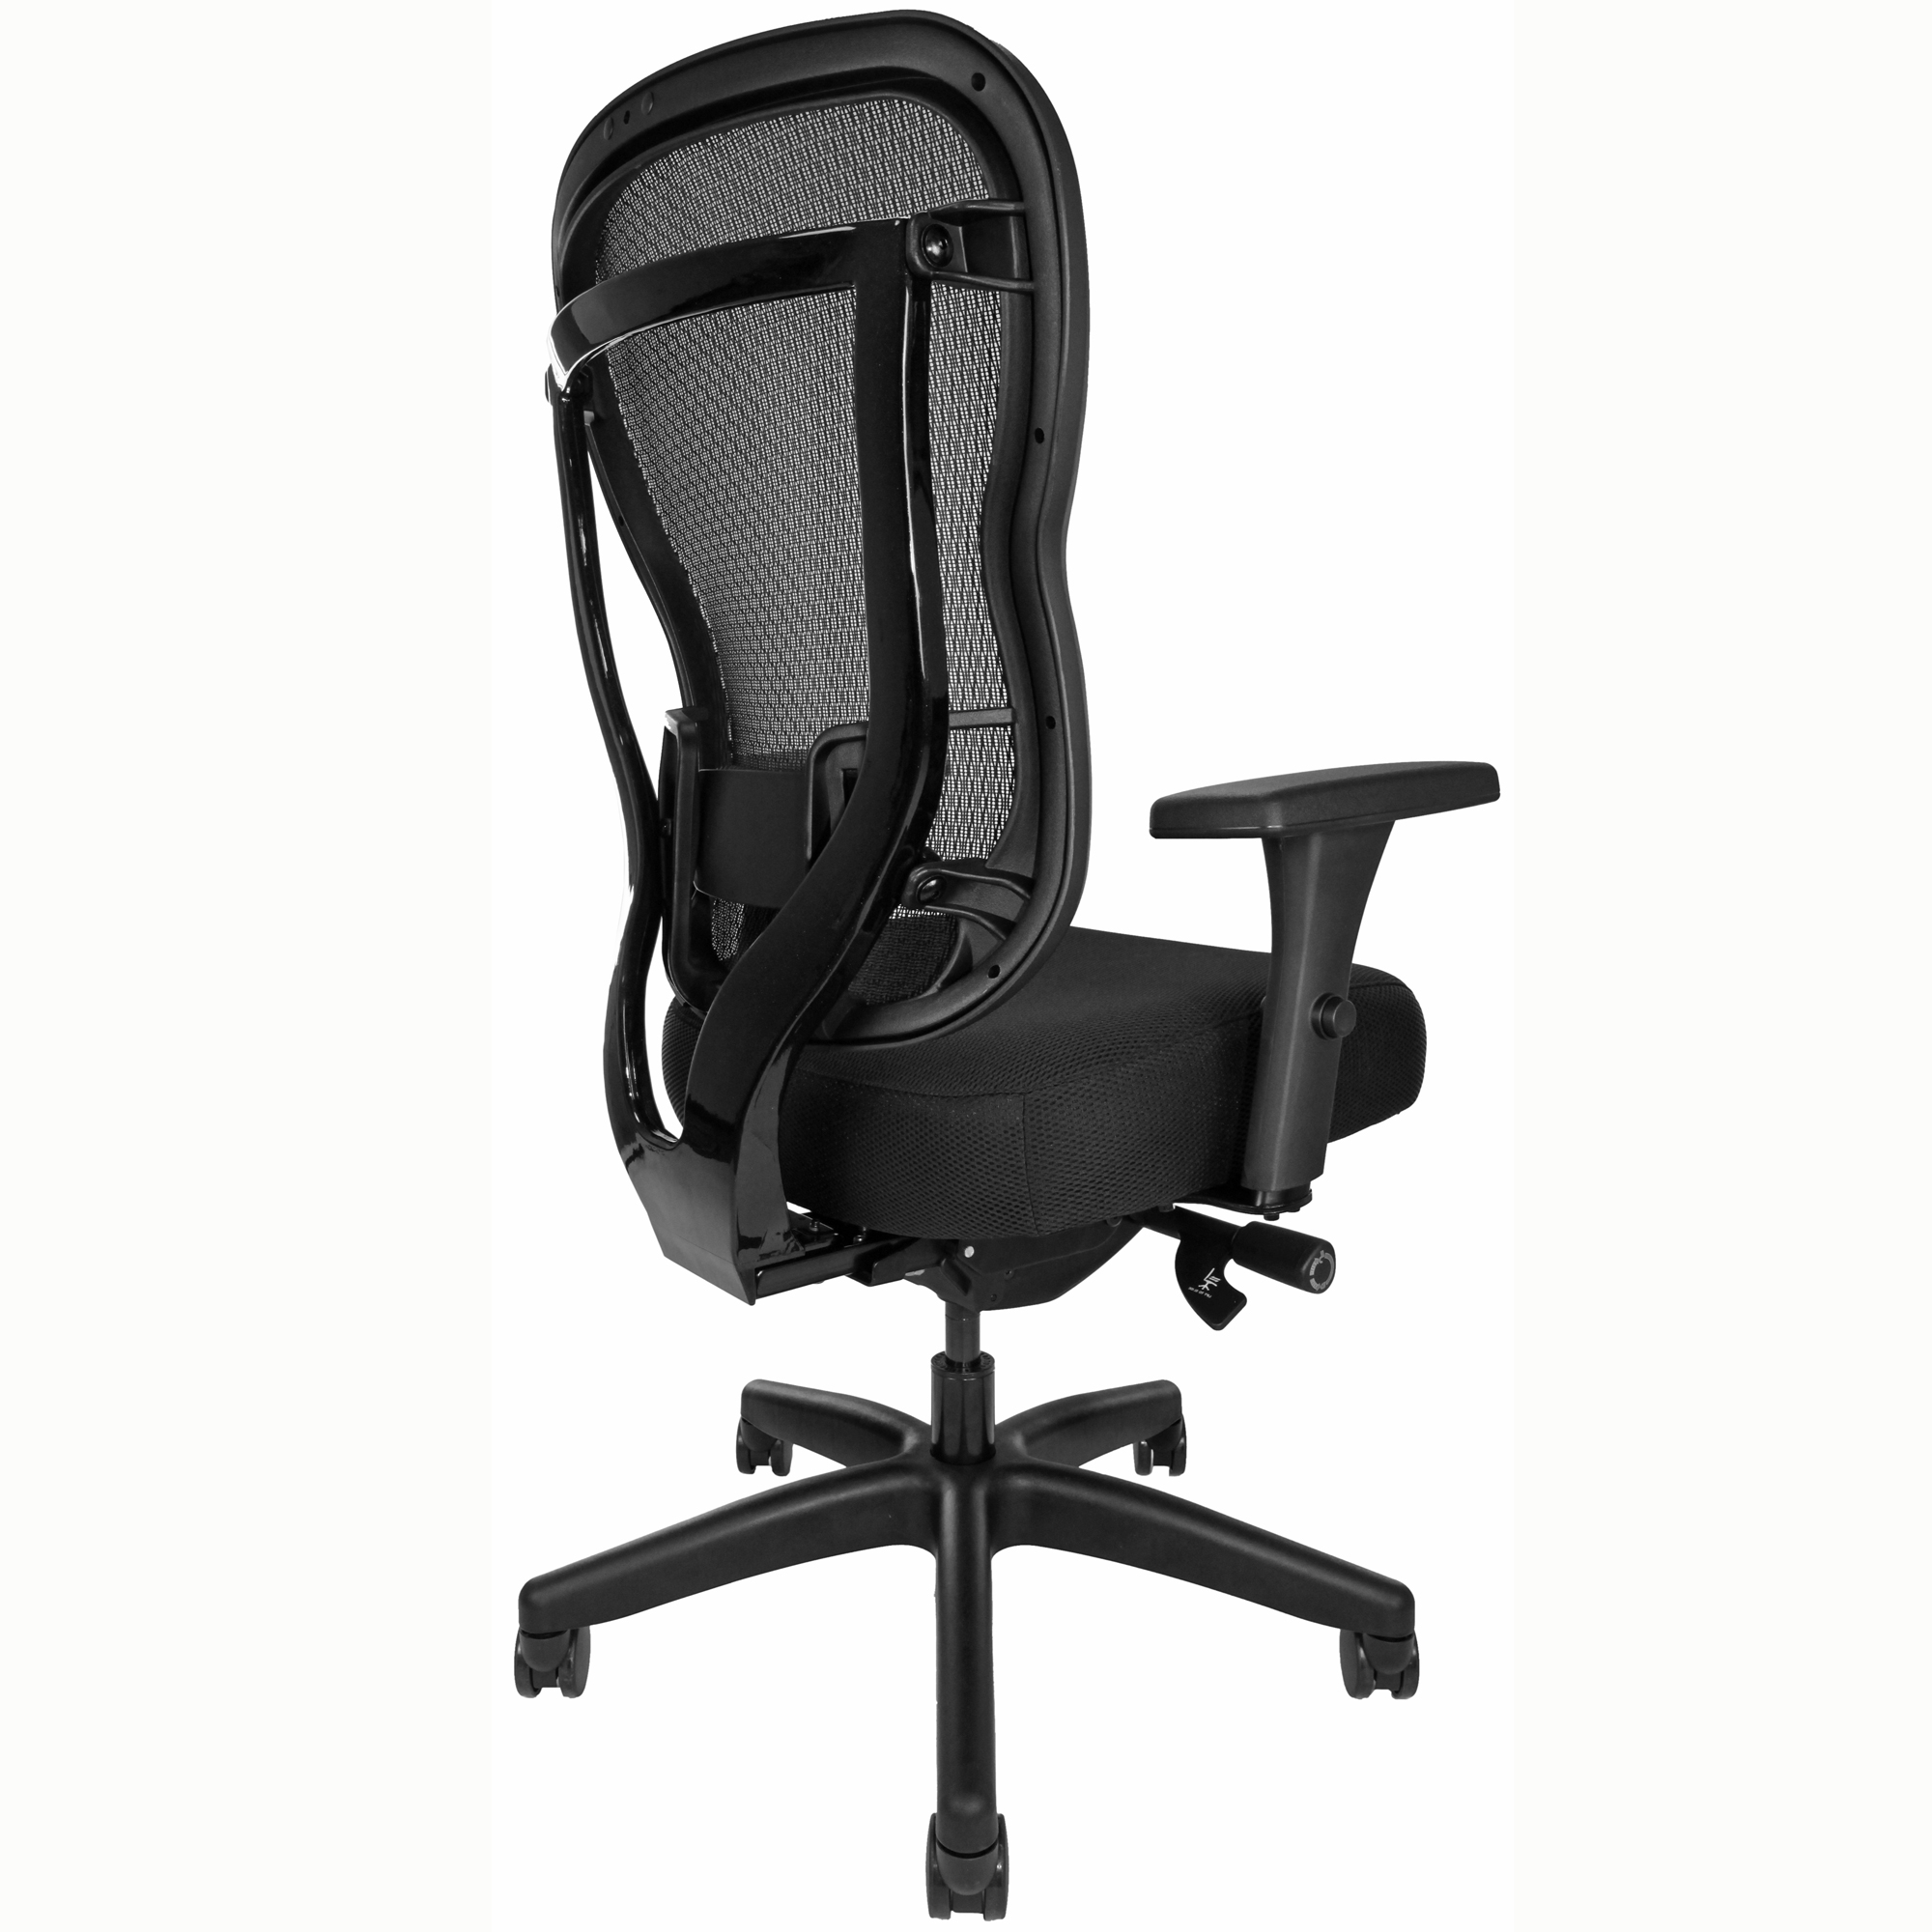 Office Chair with extra-thick seat cushion, mesh back, arms, wheels, and optional headrest